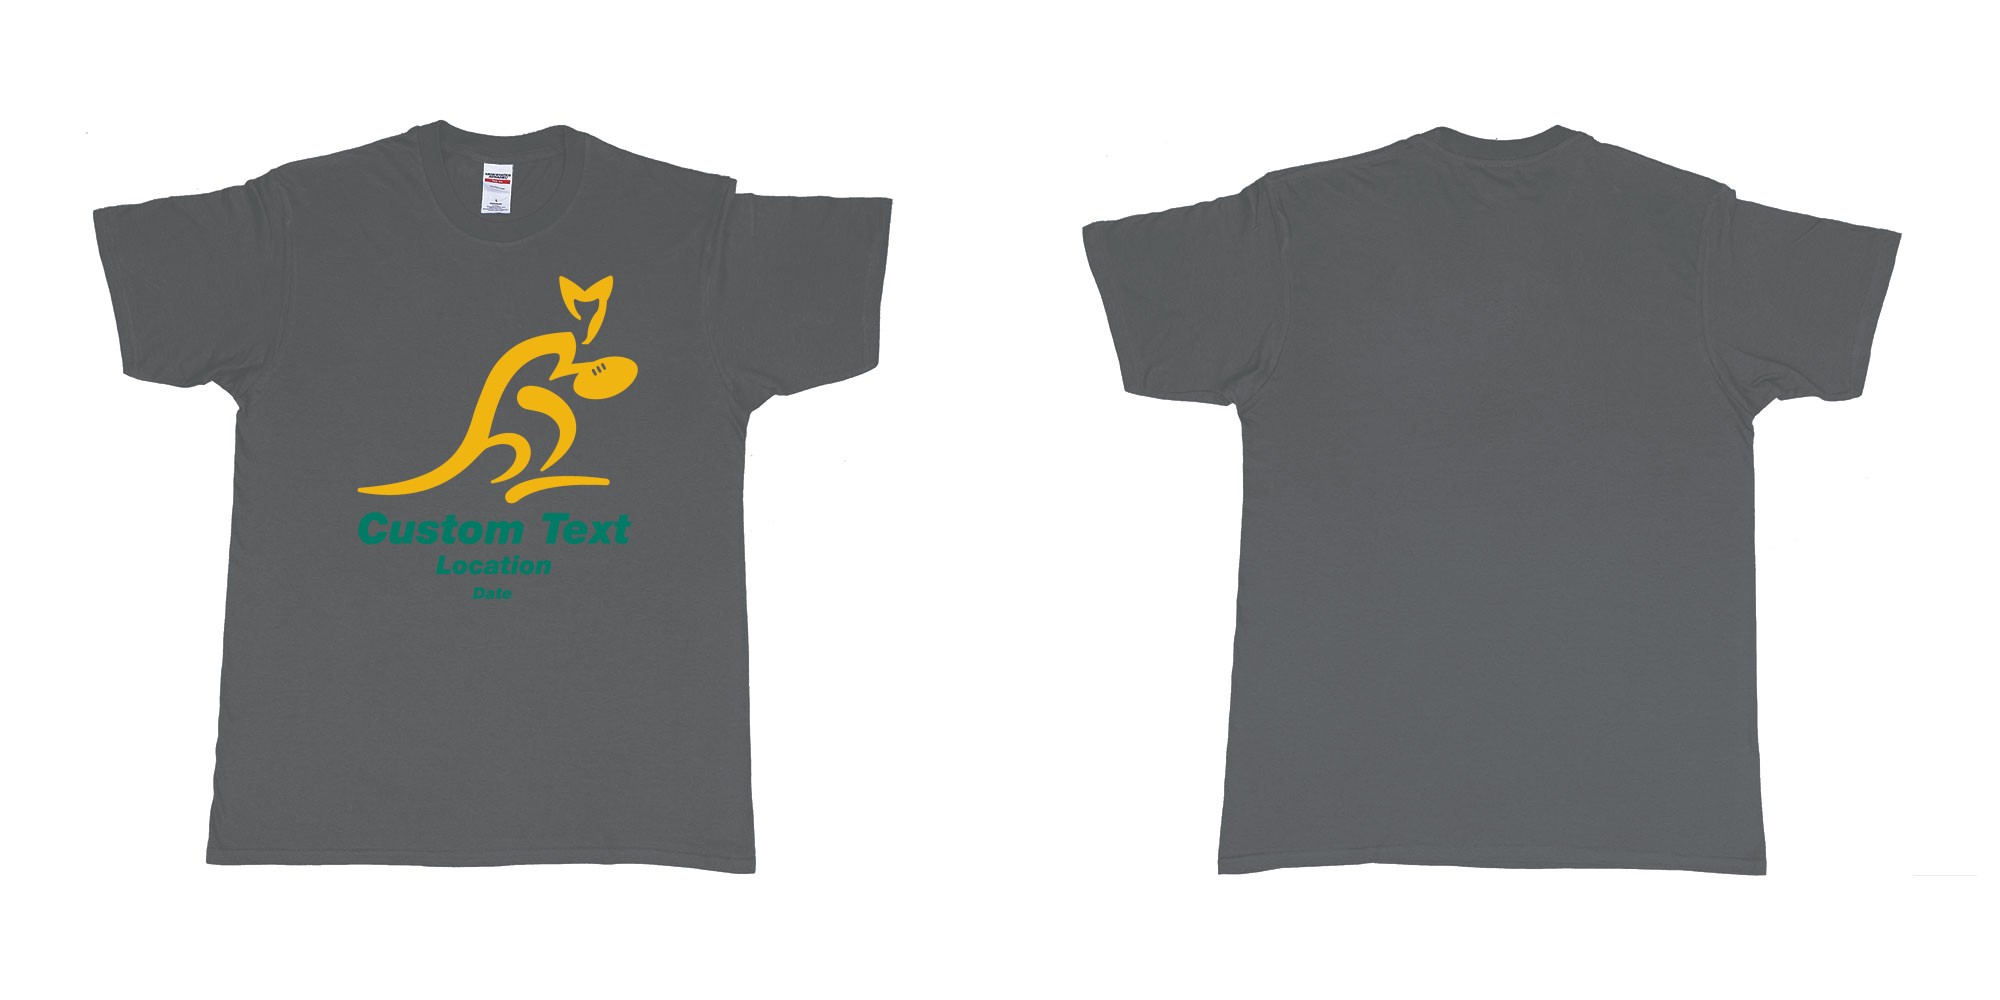 Custom tshirt design australia national rugby union team the wallabies in fabric color charcoal choice your own text made in Bali by The Pirate Way